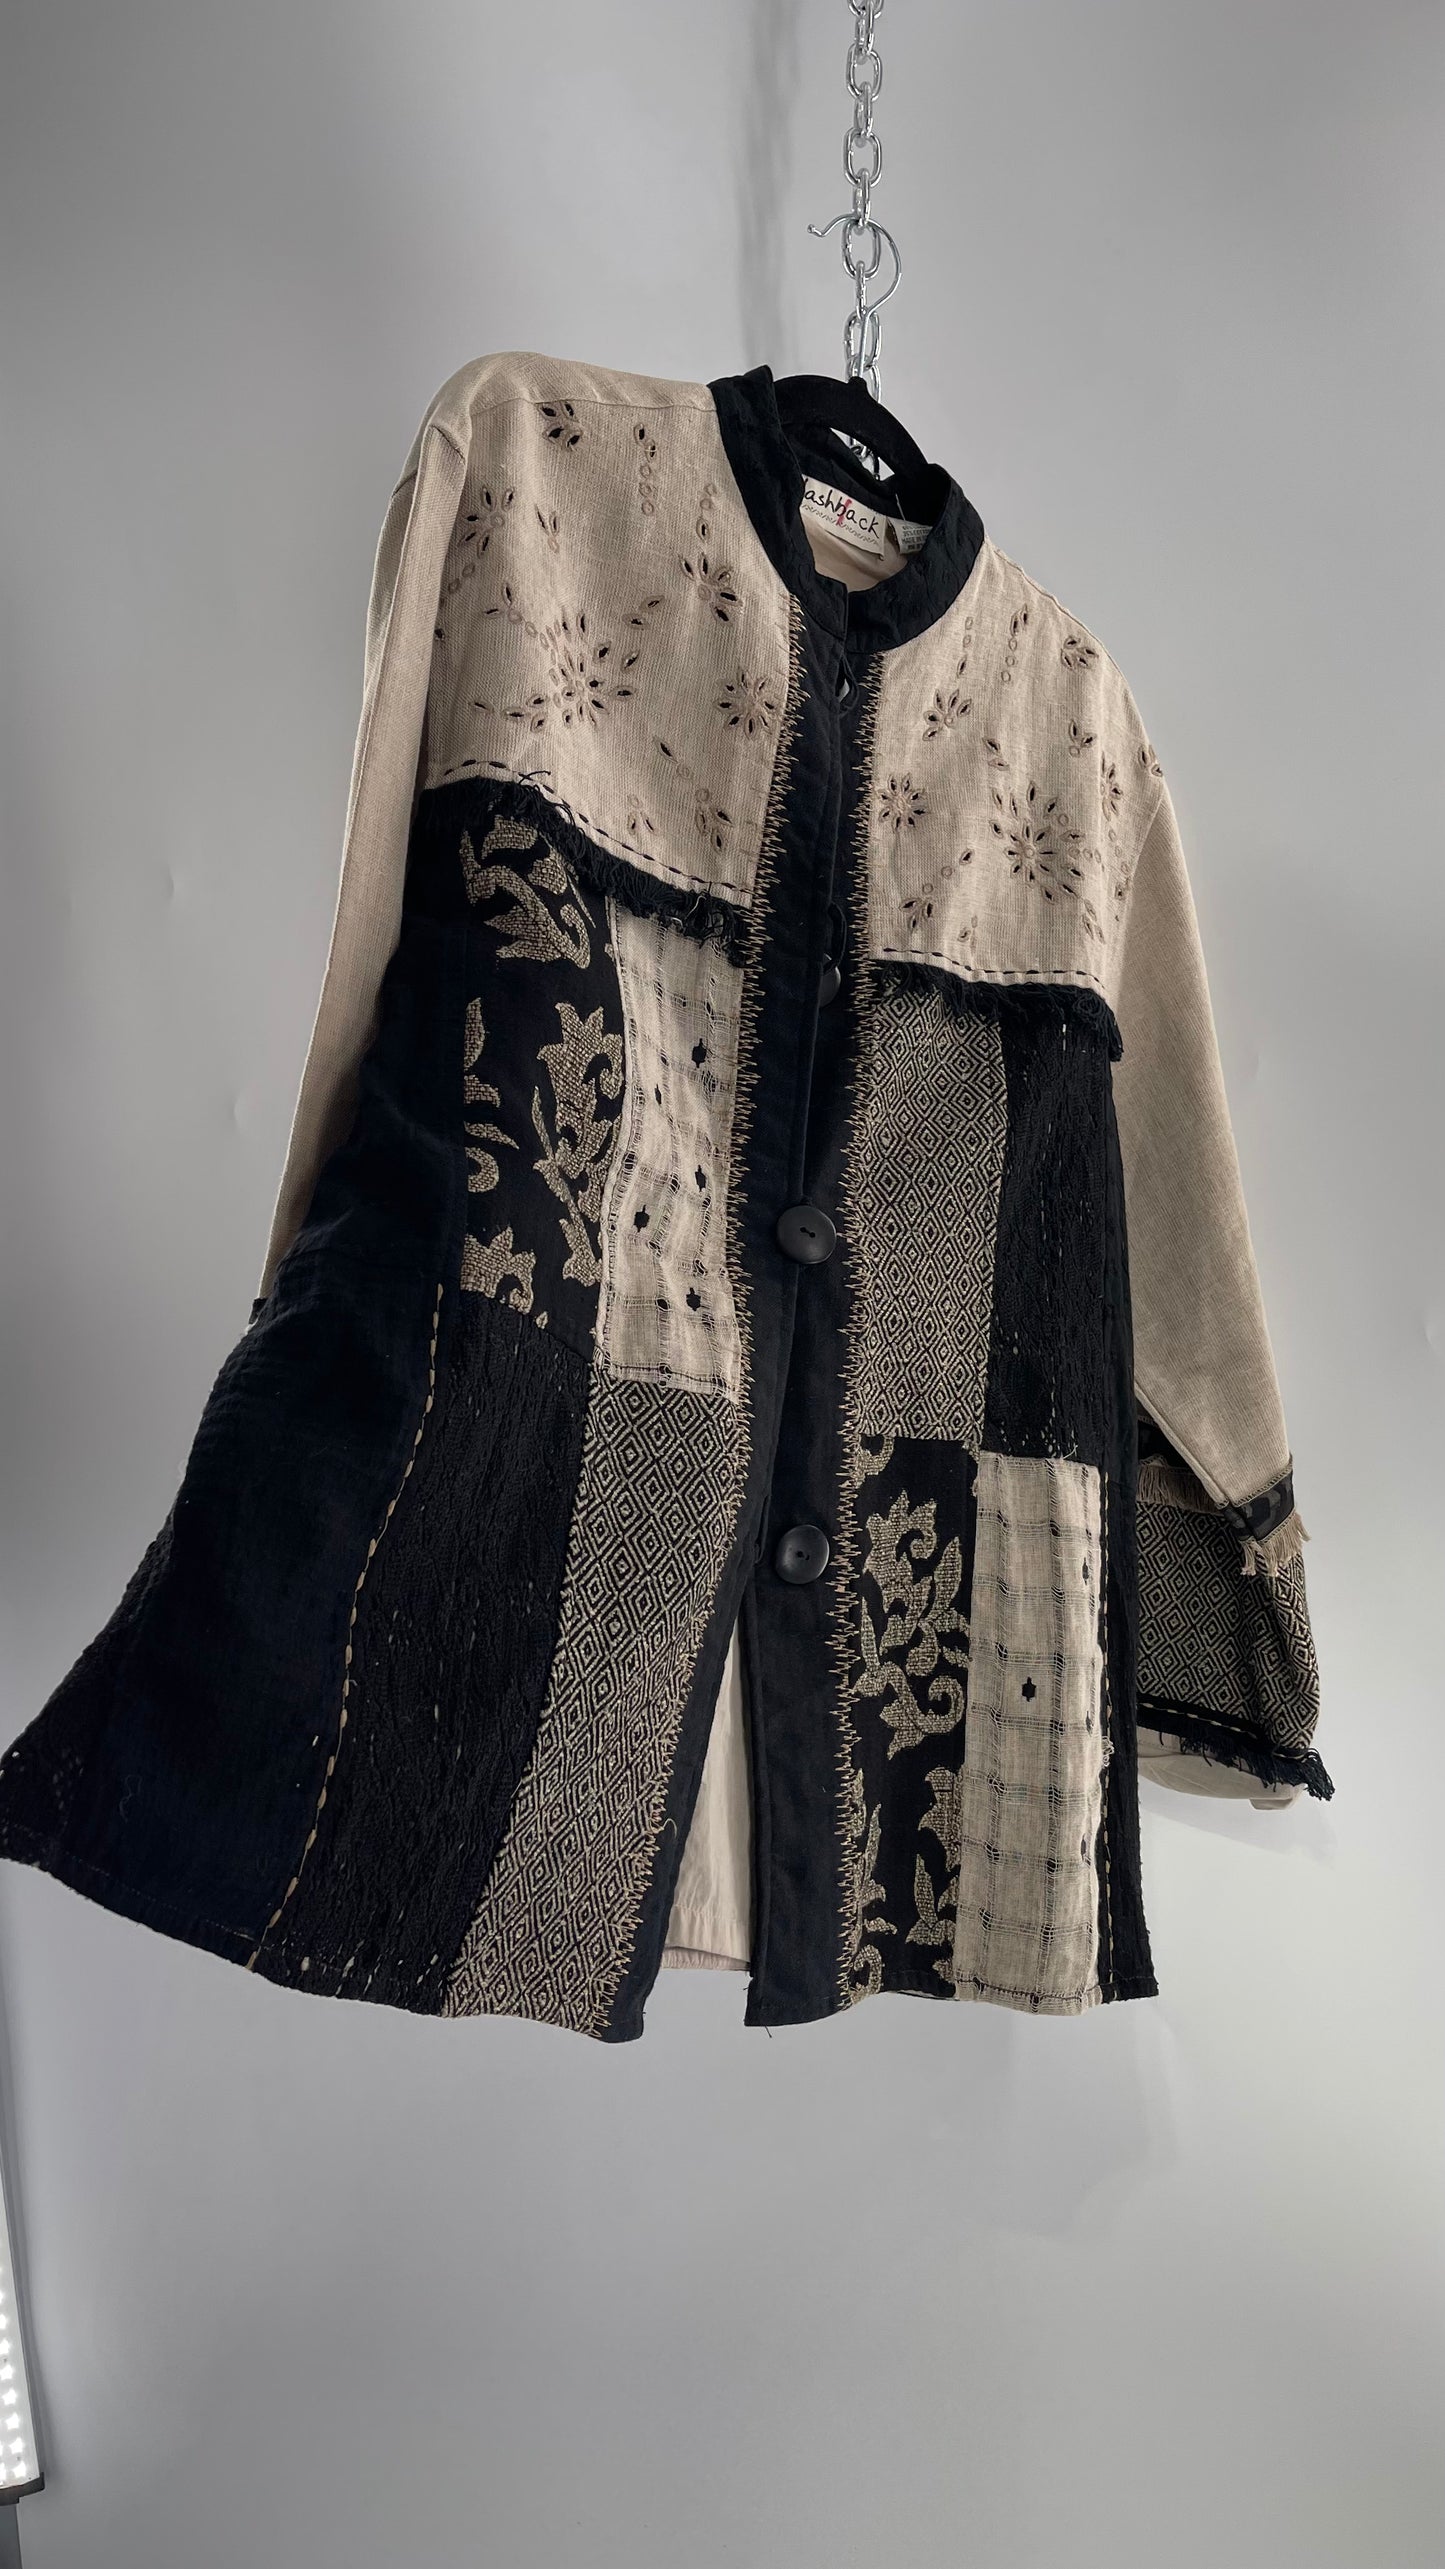 Deadstock Vintage Flashback Patchwork Coat with Mixed Neutral Fabrics, Embroidery and Fringe Details (Large)